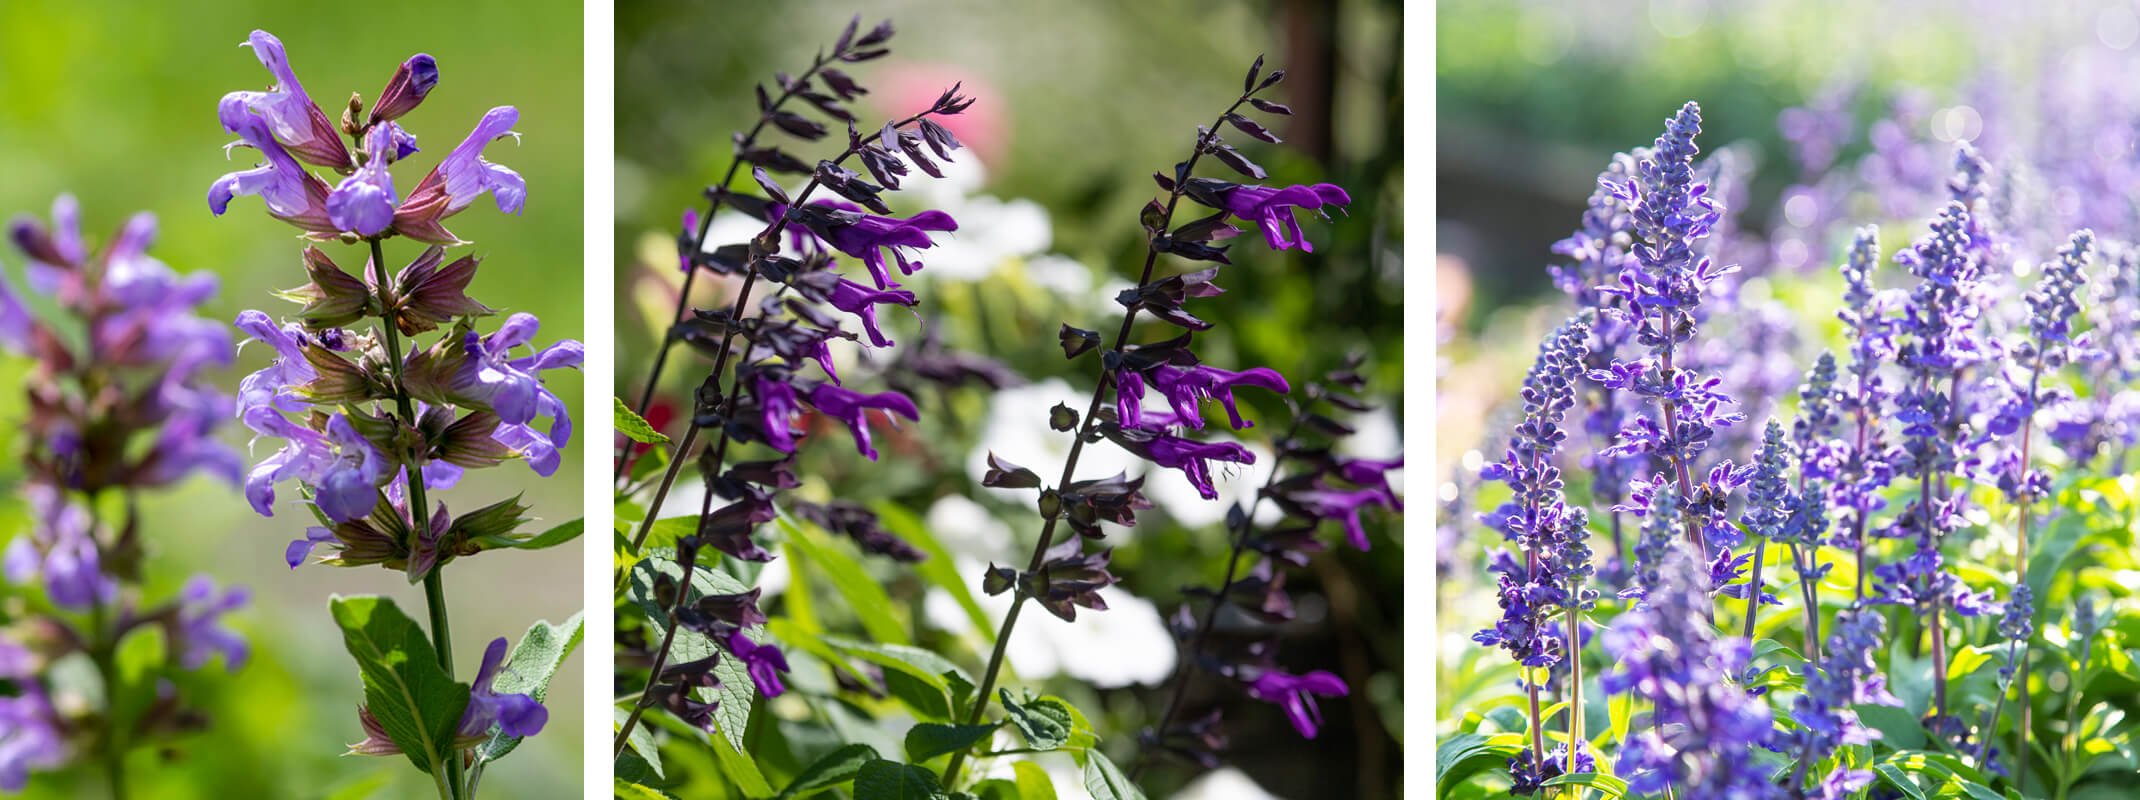 3 images of salvia